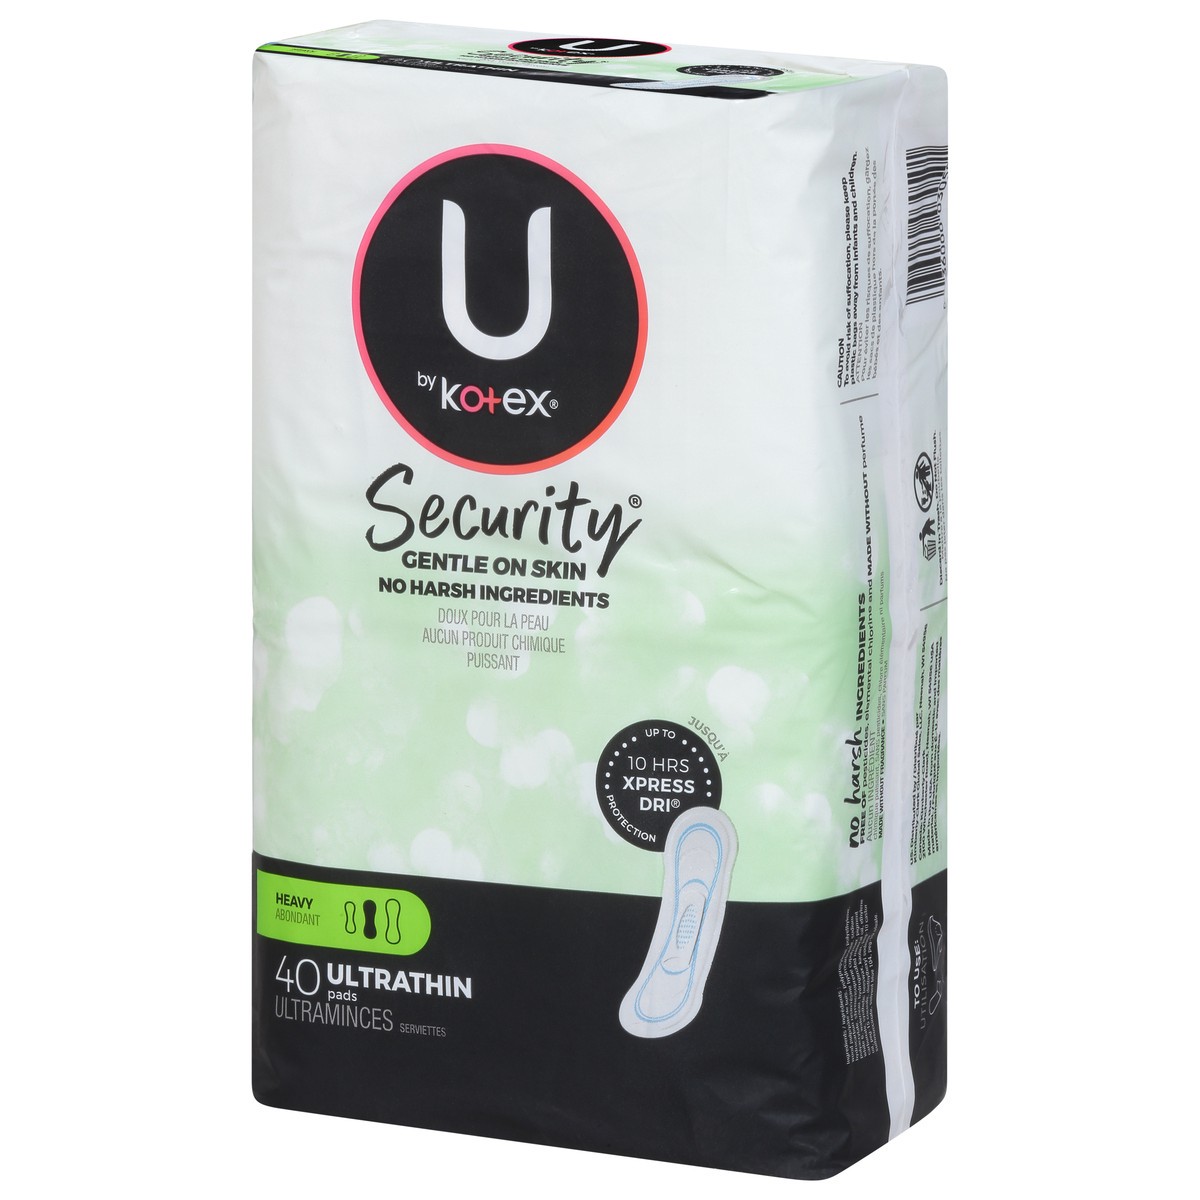 slide 3 of 16, U by Kotex Security Heavy Ultra Thin Pads 40 ea, 40 ct